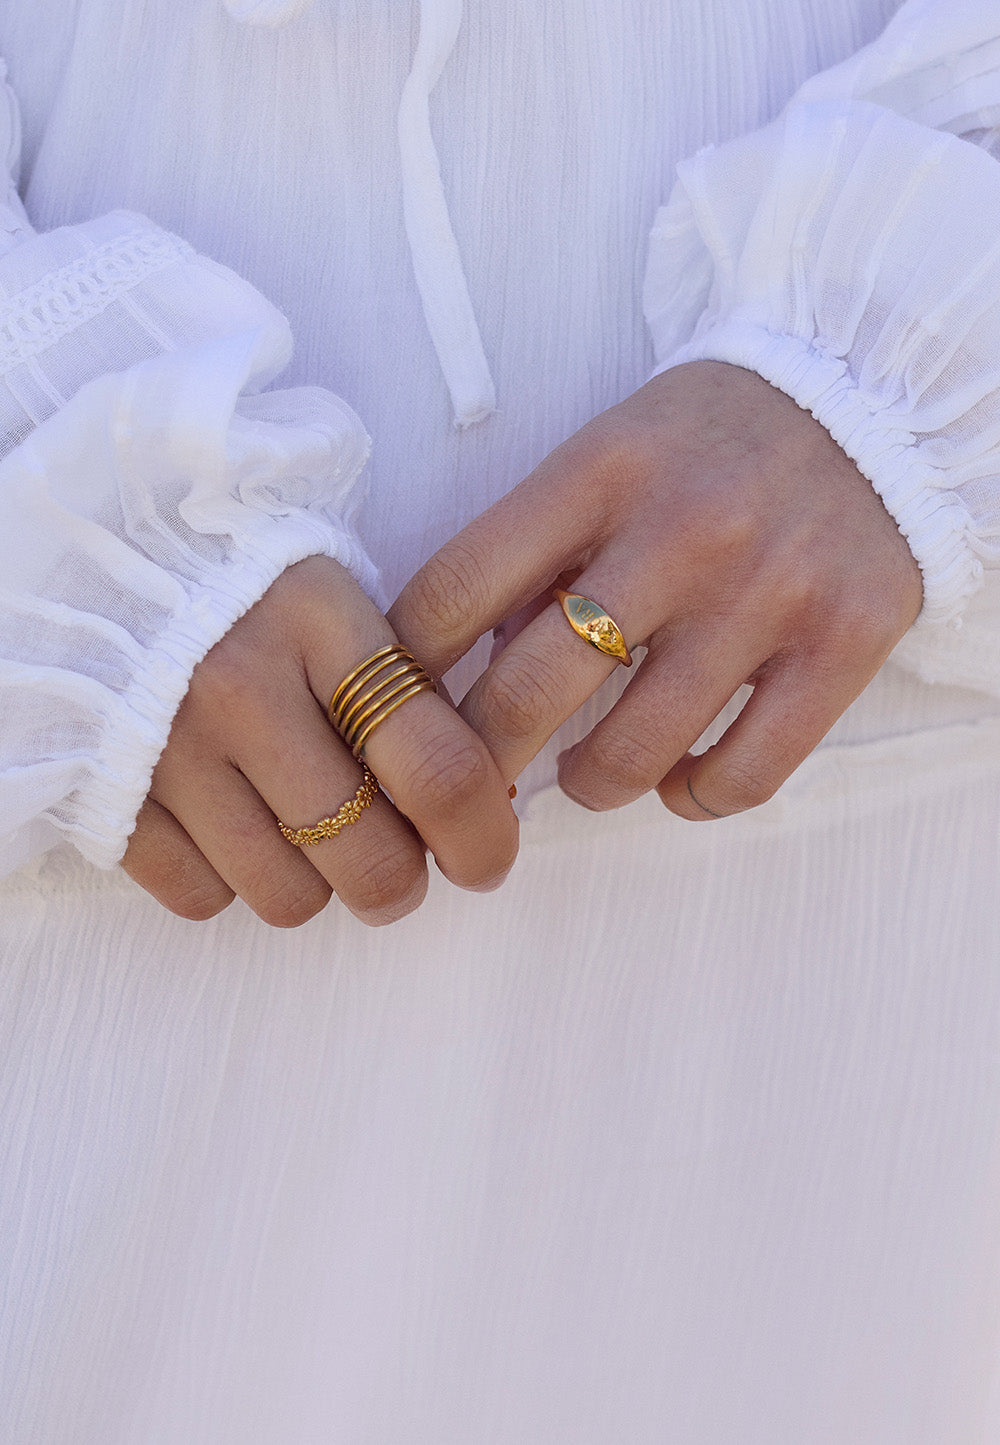 PURNIT GOLD RING